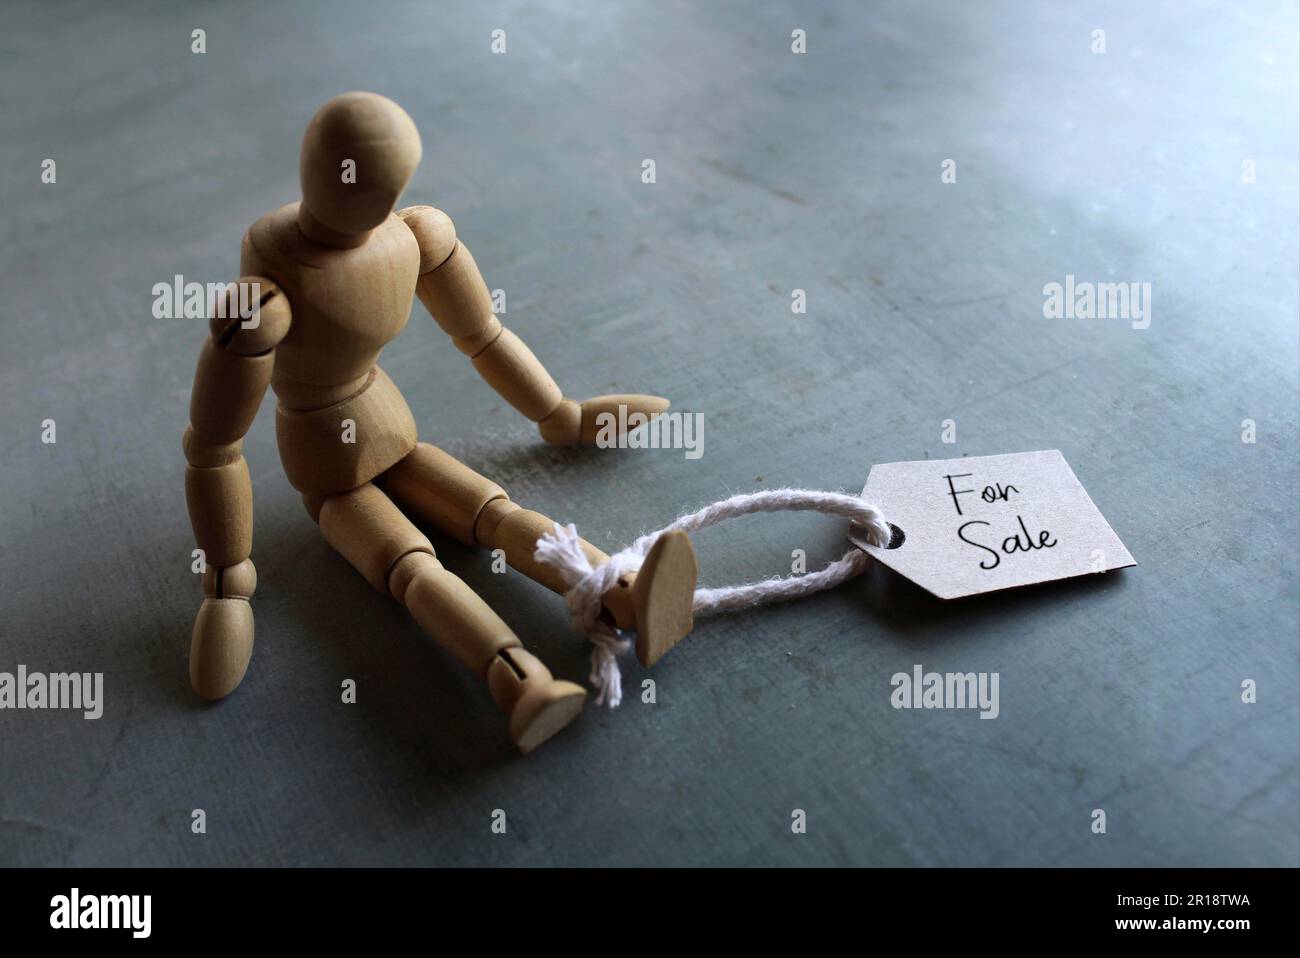 Selective focus image of doll with tag FOR SALE. Human trafficking concept Stock Photo